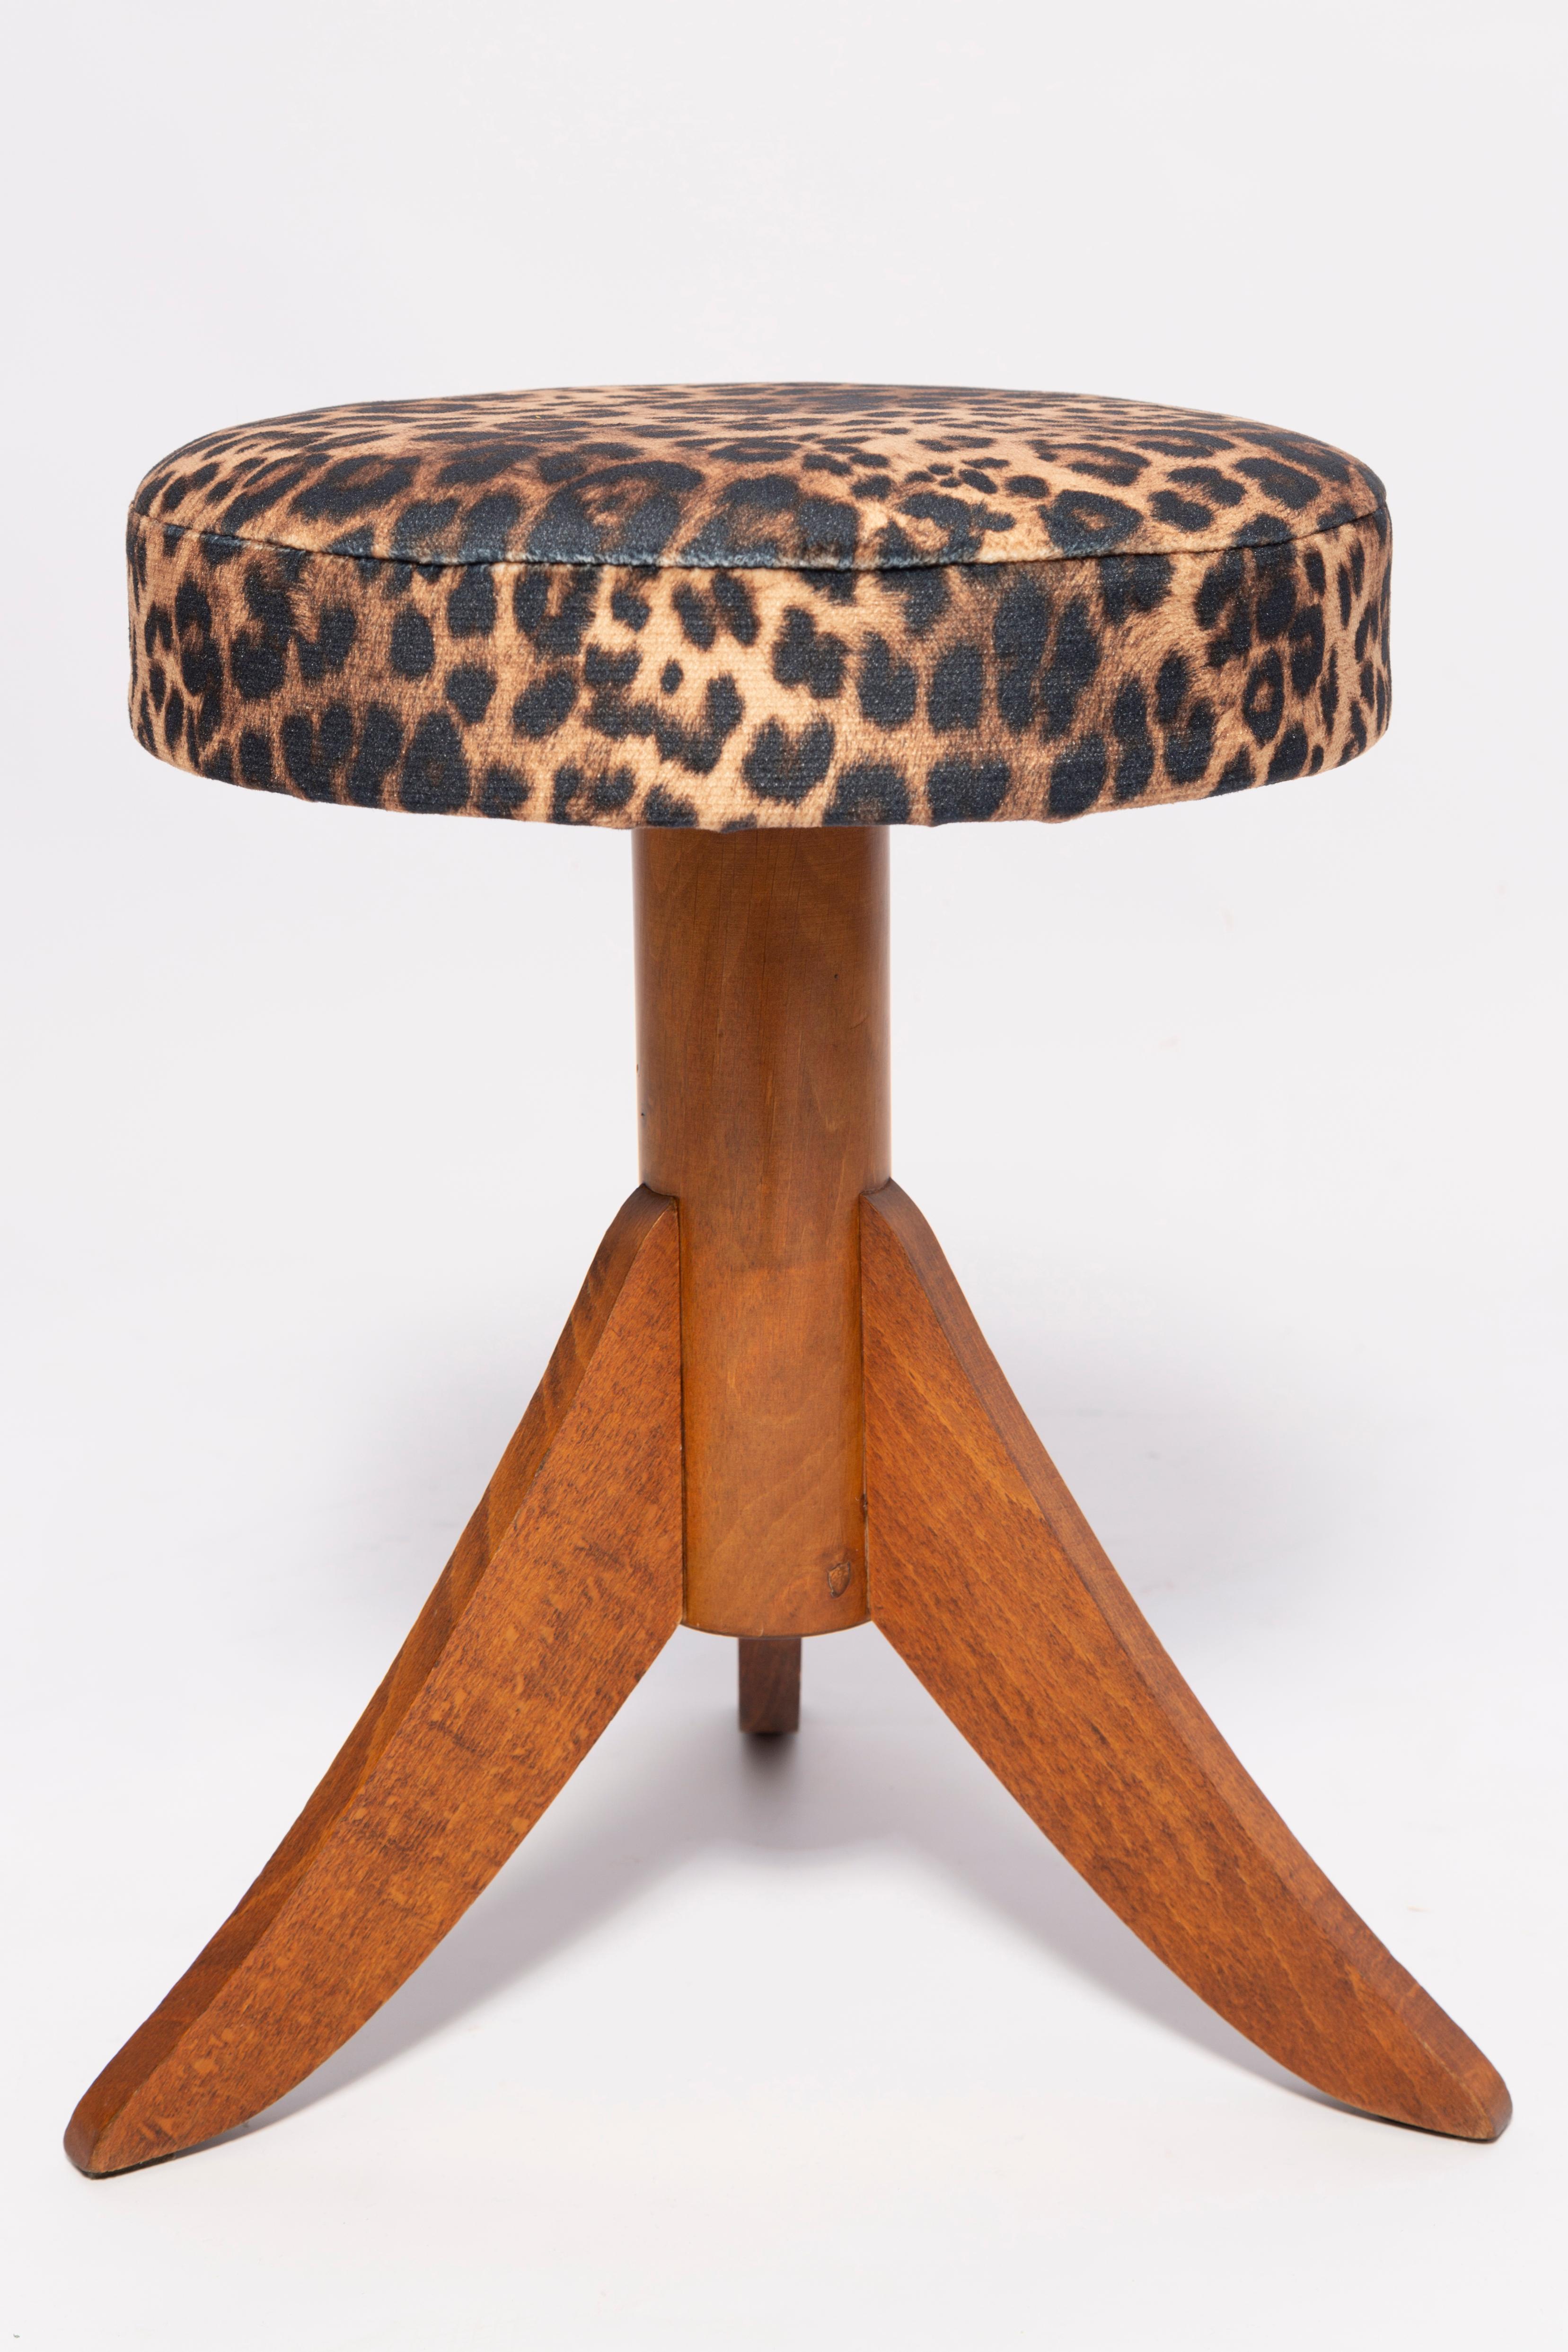 Stool from the turn of the 1960s and 1970s. High-quality printed velvet - soft and very pleasant to the touch, vivid and natural colors - a beautiful, original pattern! The stool consists of an upholstered part, a seat and wooden legs narrowing